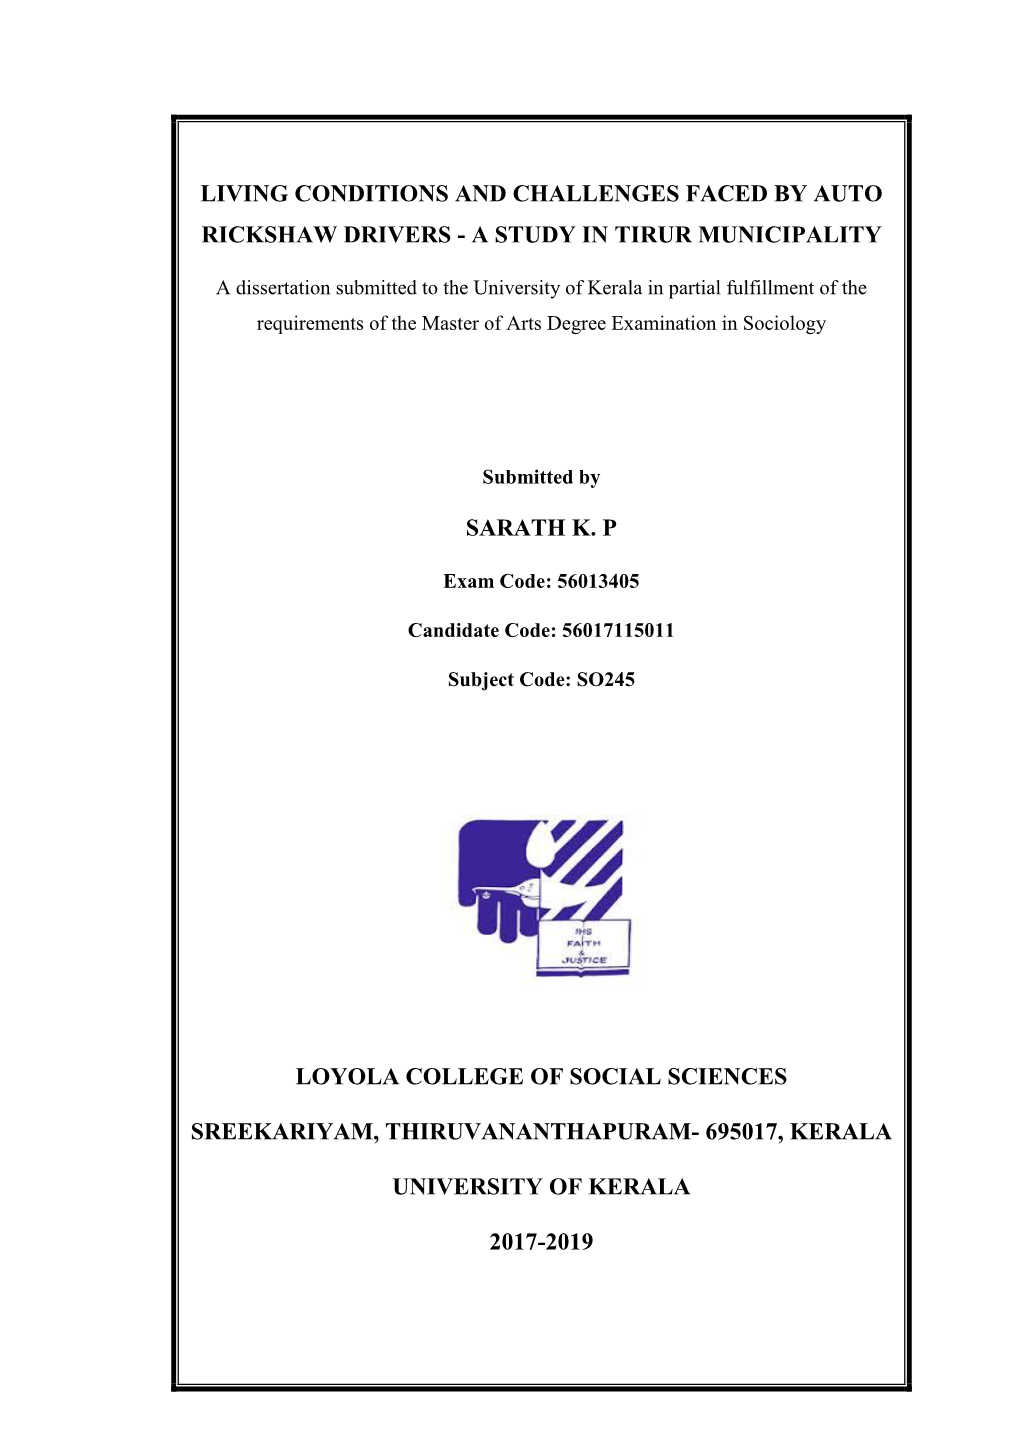 Living Conditions and Challenges Faced by Auto Rickshaw Drivers - a Study in Tirur Municipality